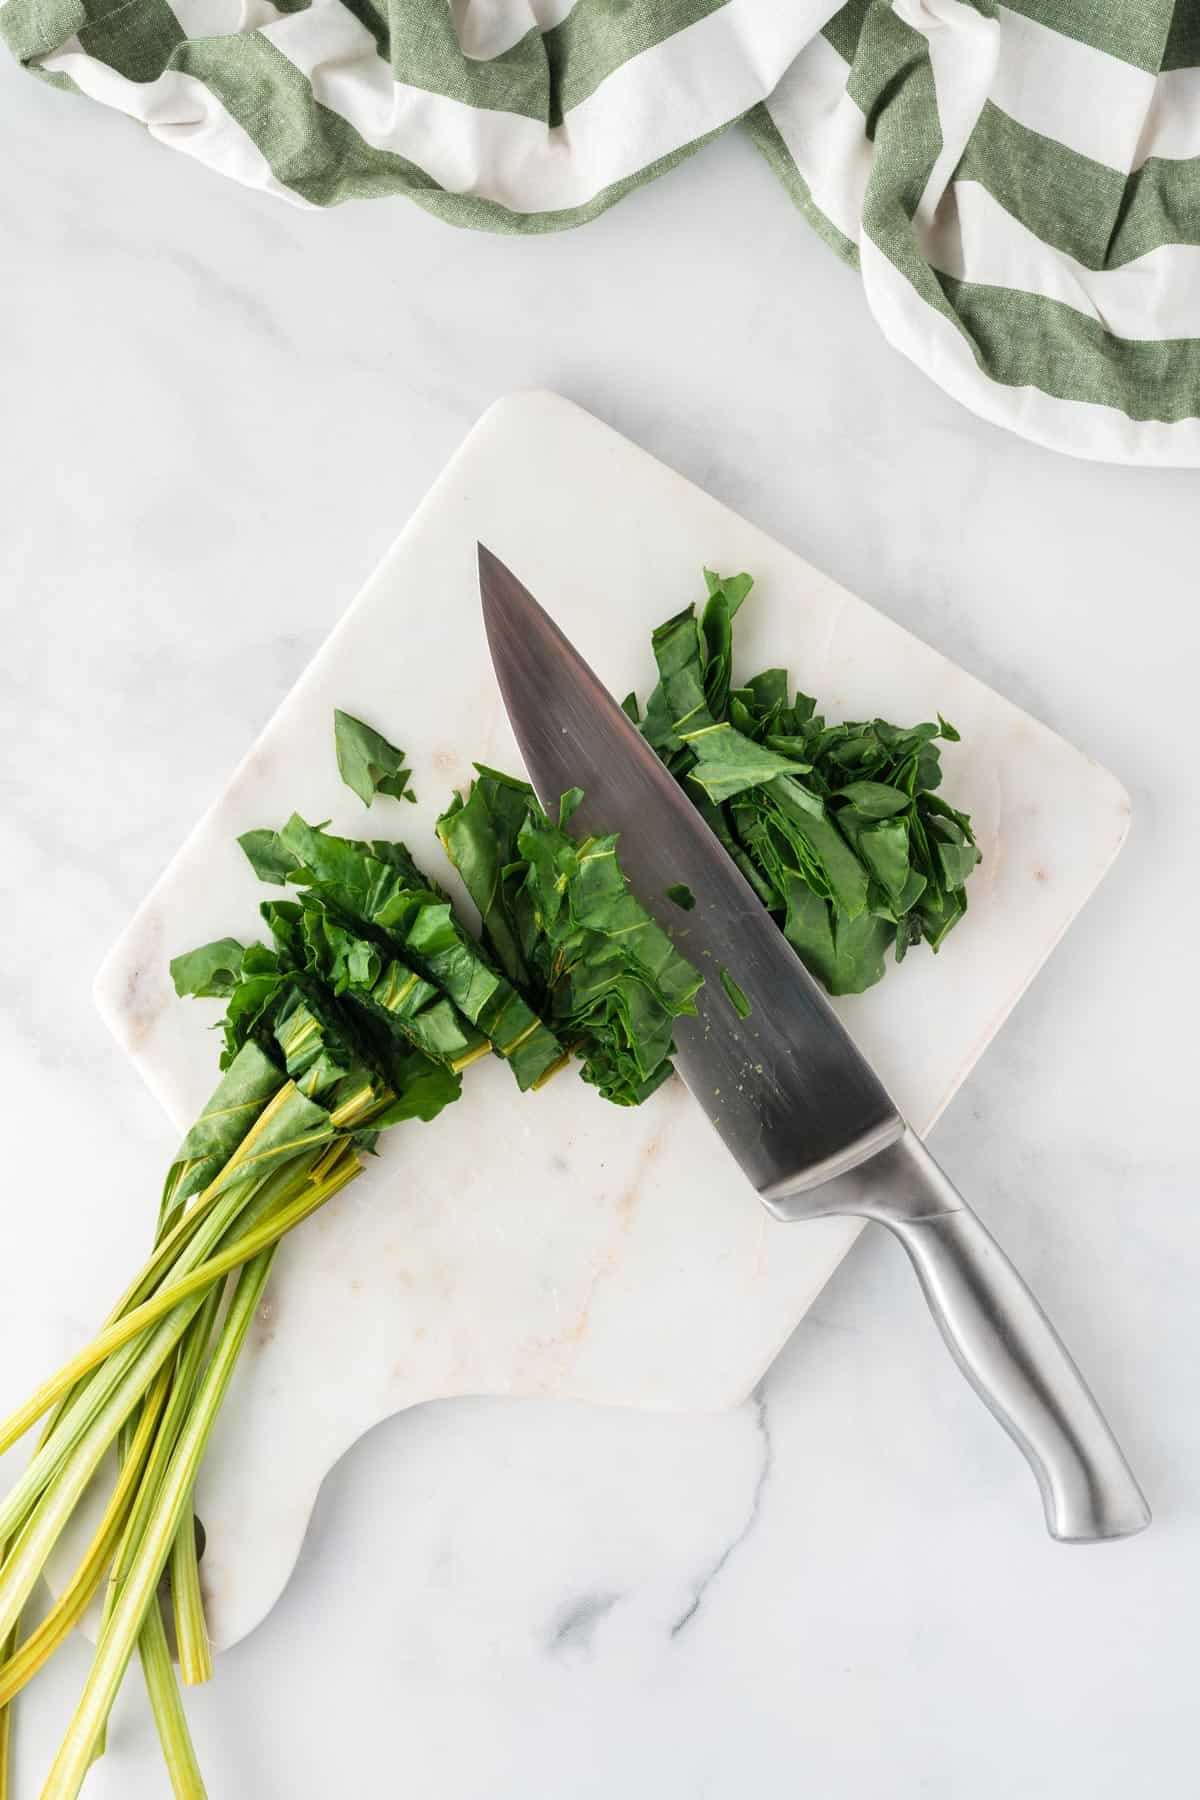 A picture of slicing beet greens with a knife on a white cutting board